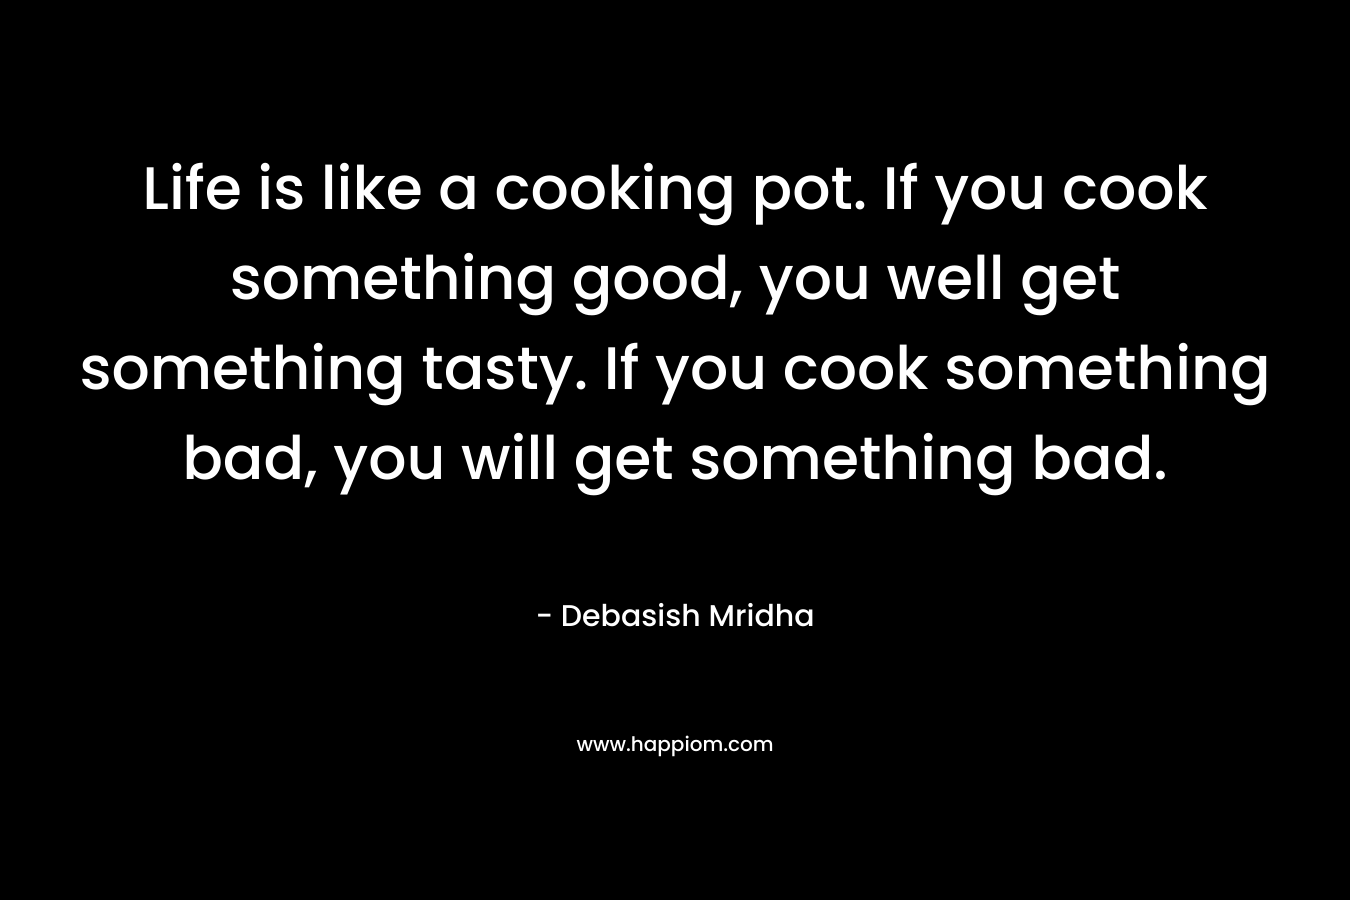 Life is like a cooking pot. If you cook something good, you well get something tasty. If you cook something bad, you will get something bad.